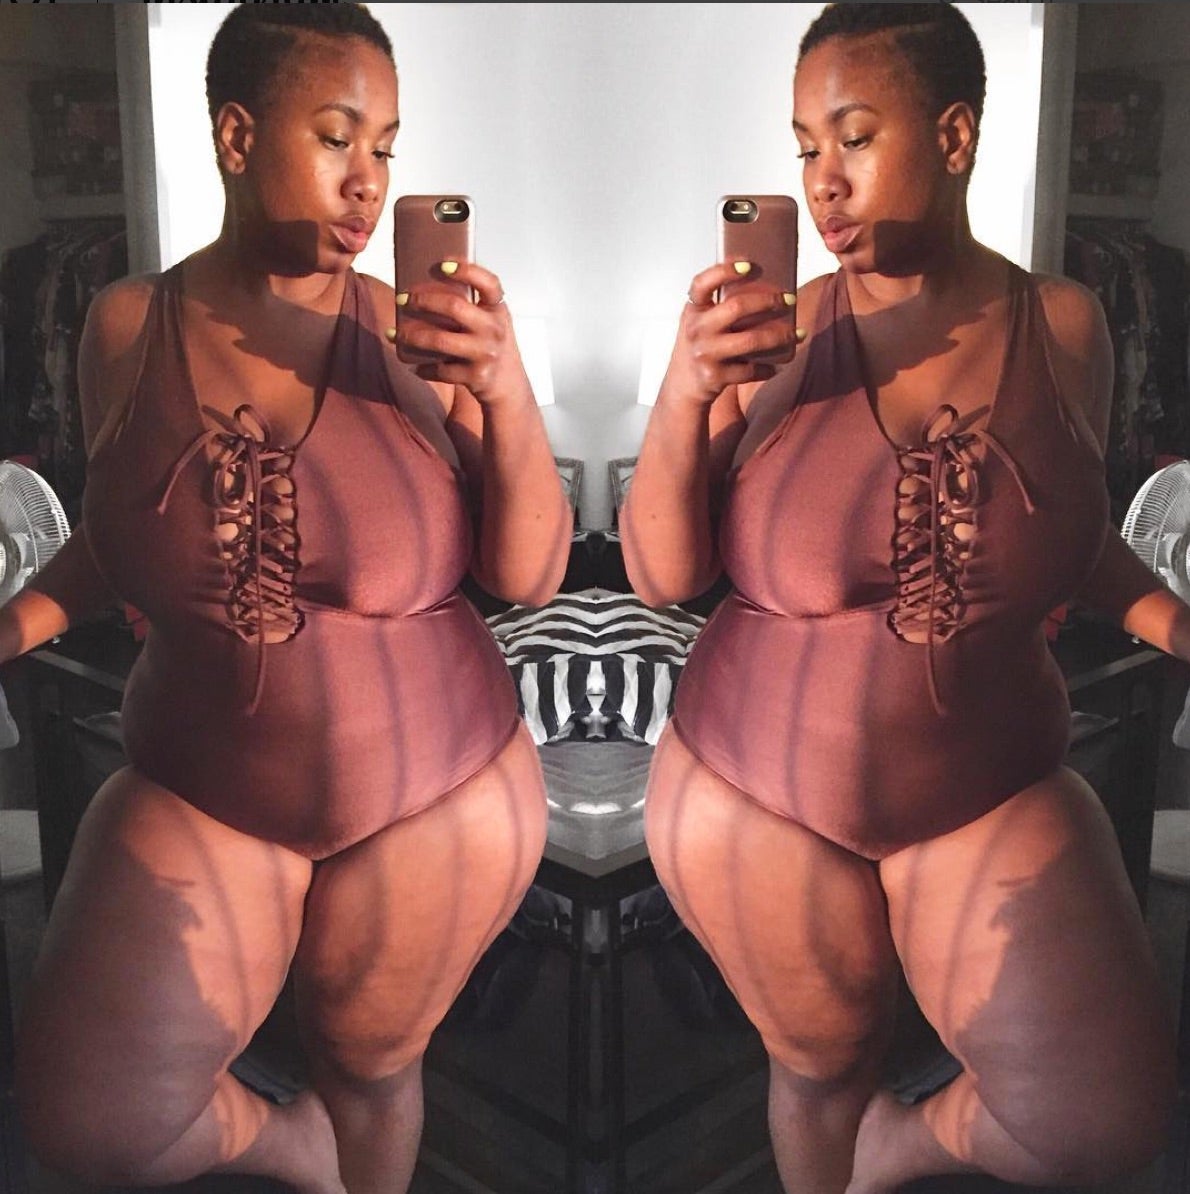 These Curvy Girls Are Absolutely Slaying Thier Swimwear This Summer